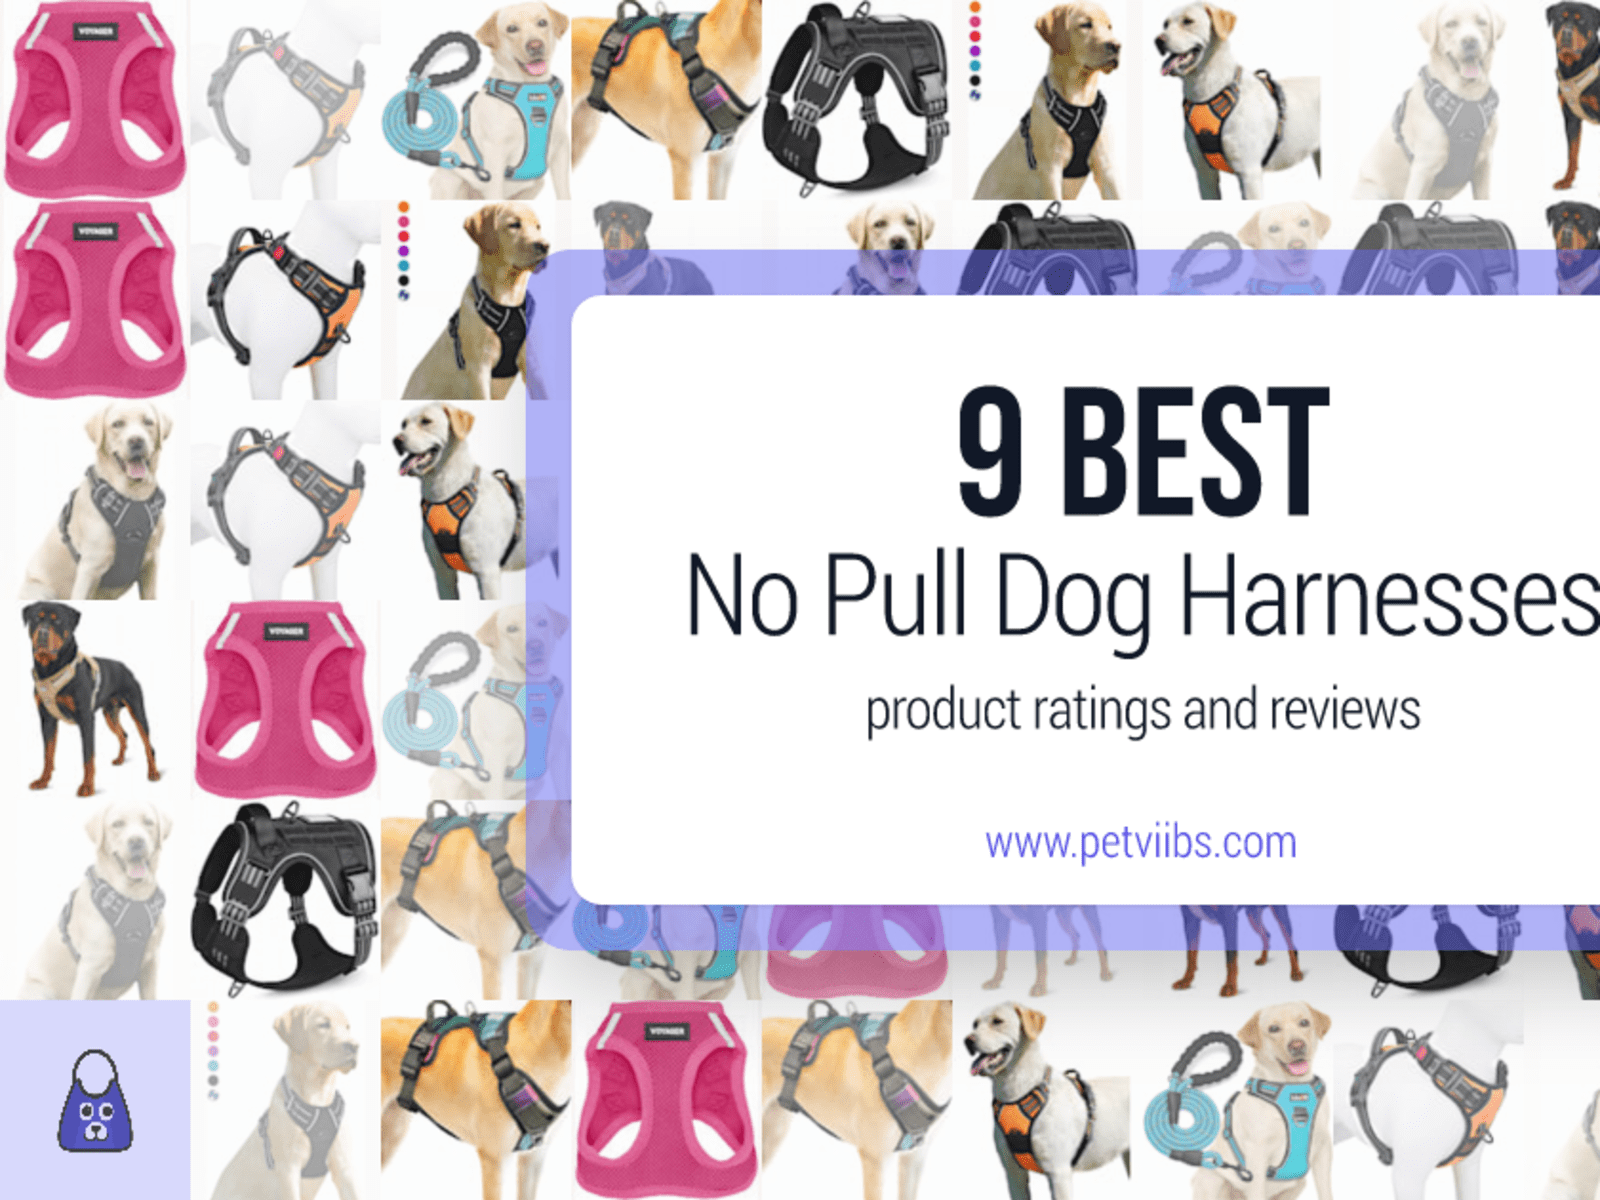 Best No Pull Dog Harnesses Ratings and Reviews